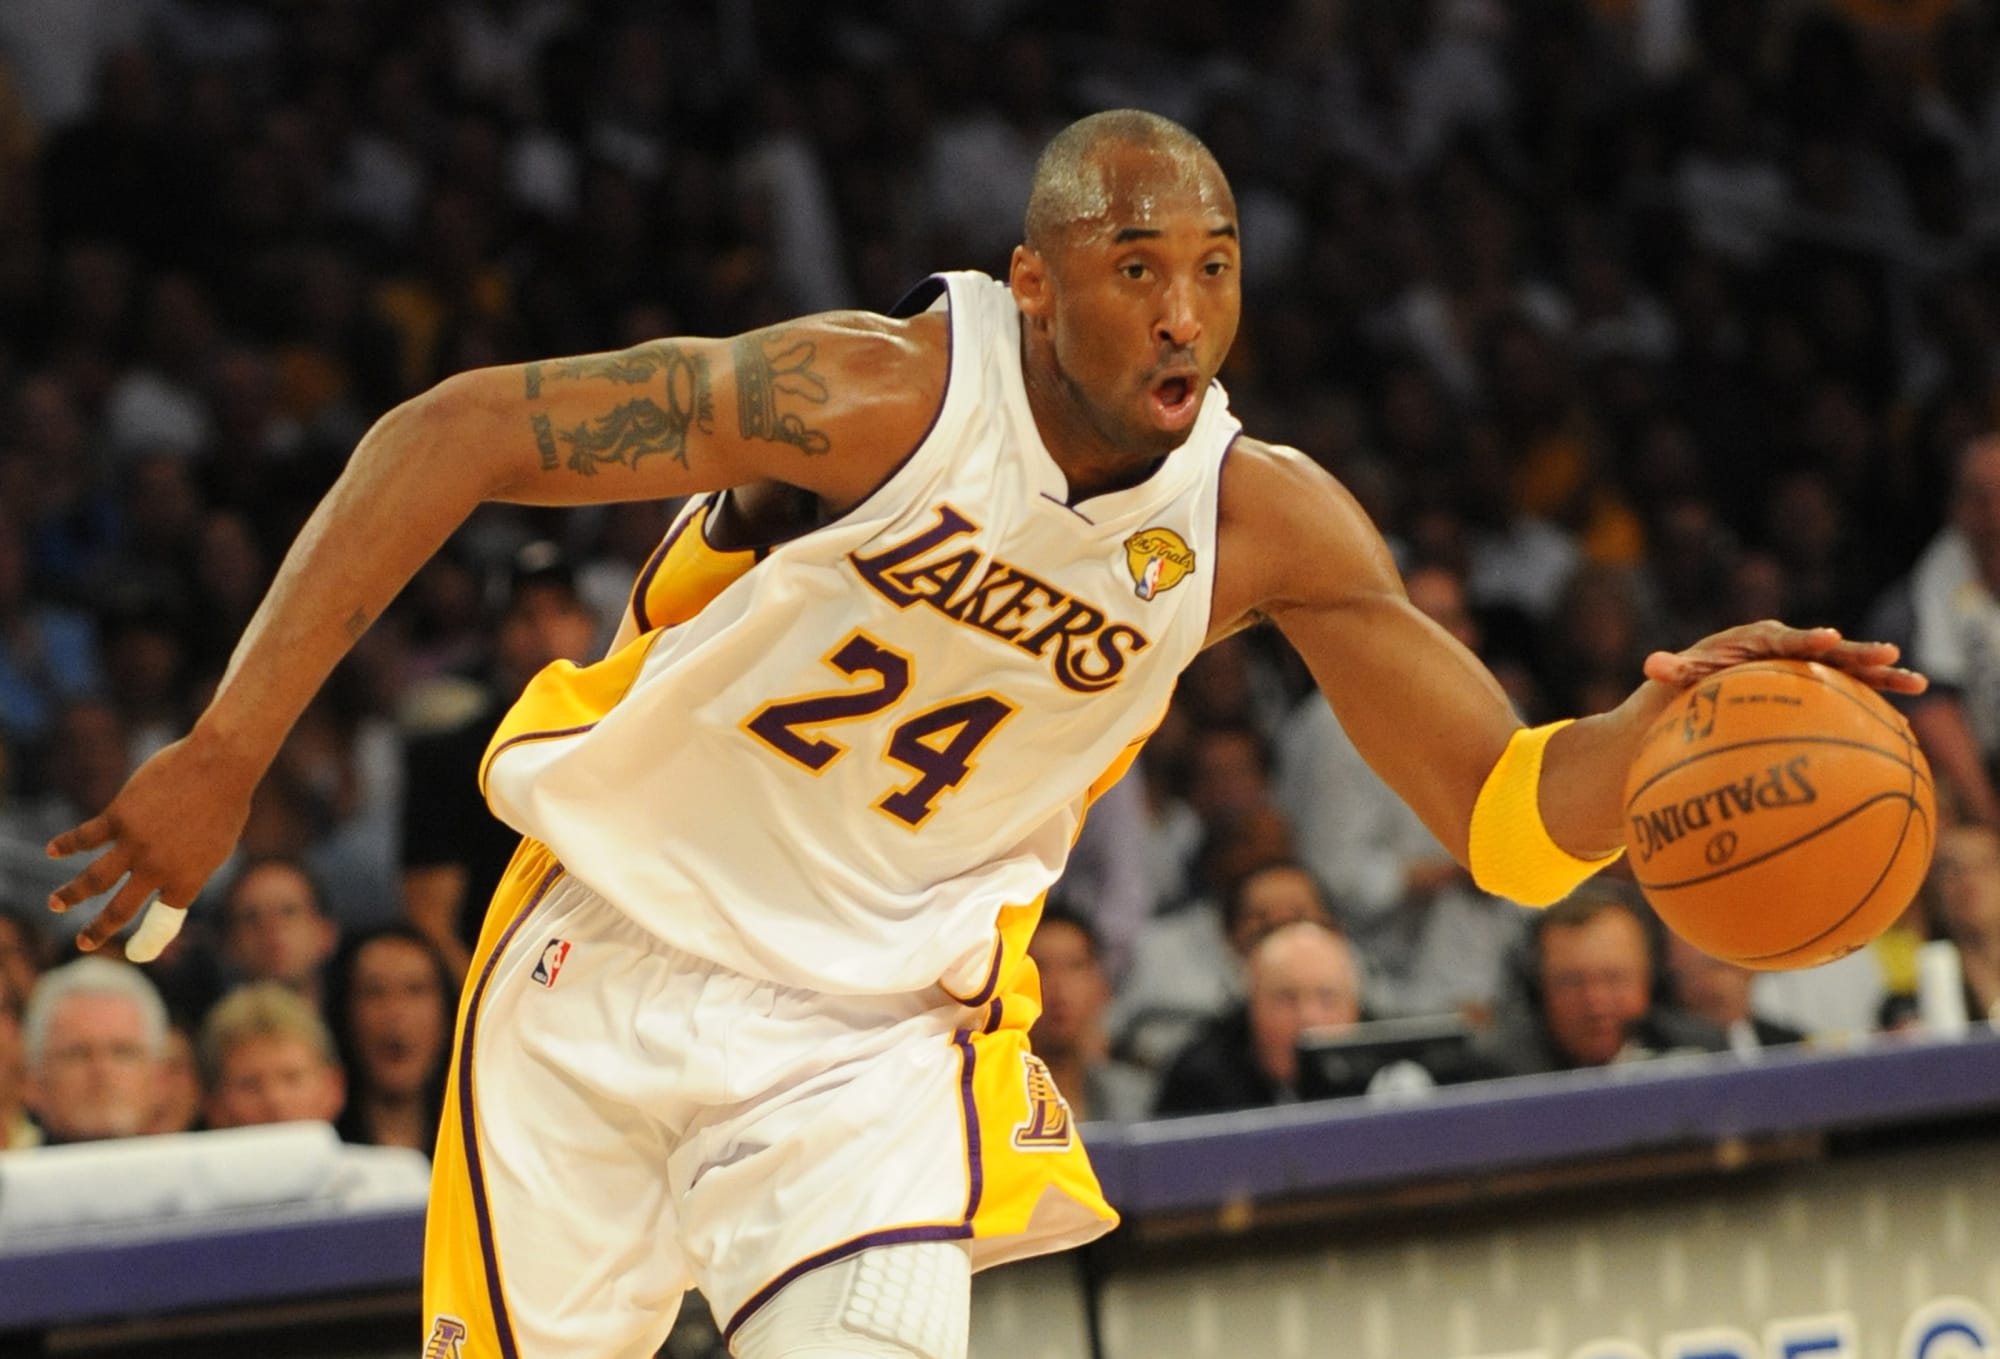 Los Angeles Lakers: Kobe Bryant is the most skilled player ever